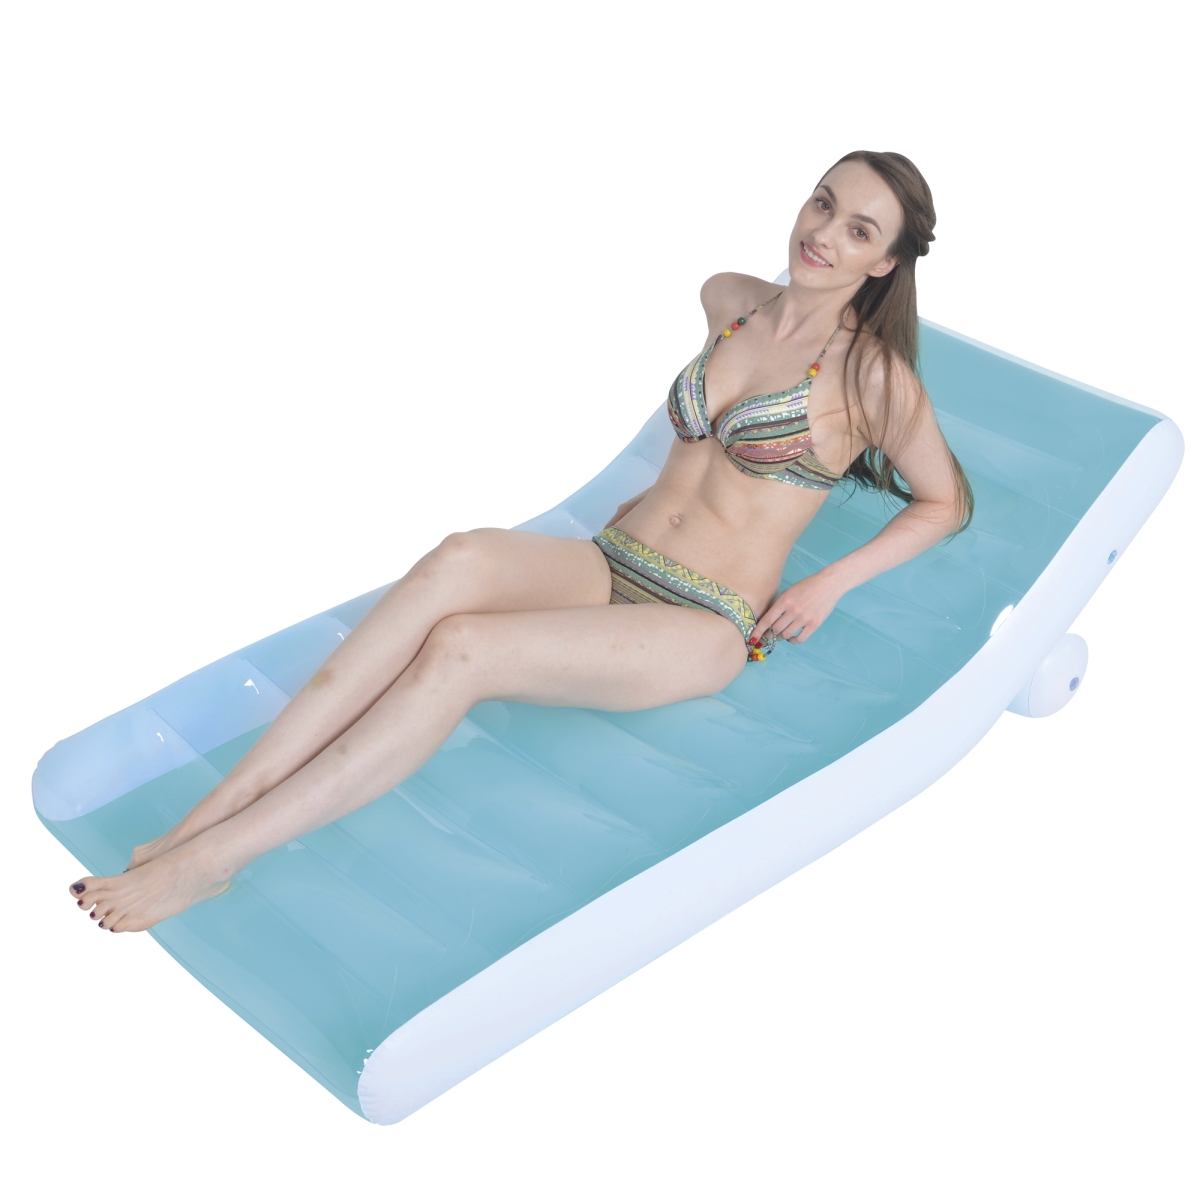 34808553 66.5 in. Blue & White Inflatable Pool Lounger Float -  Pool Central